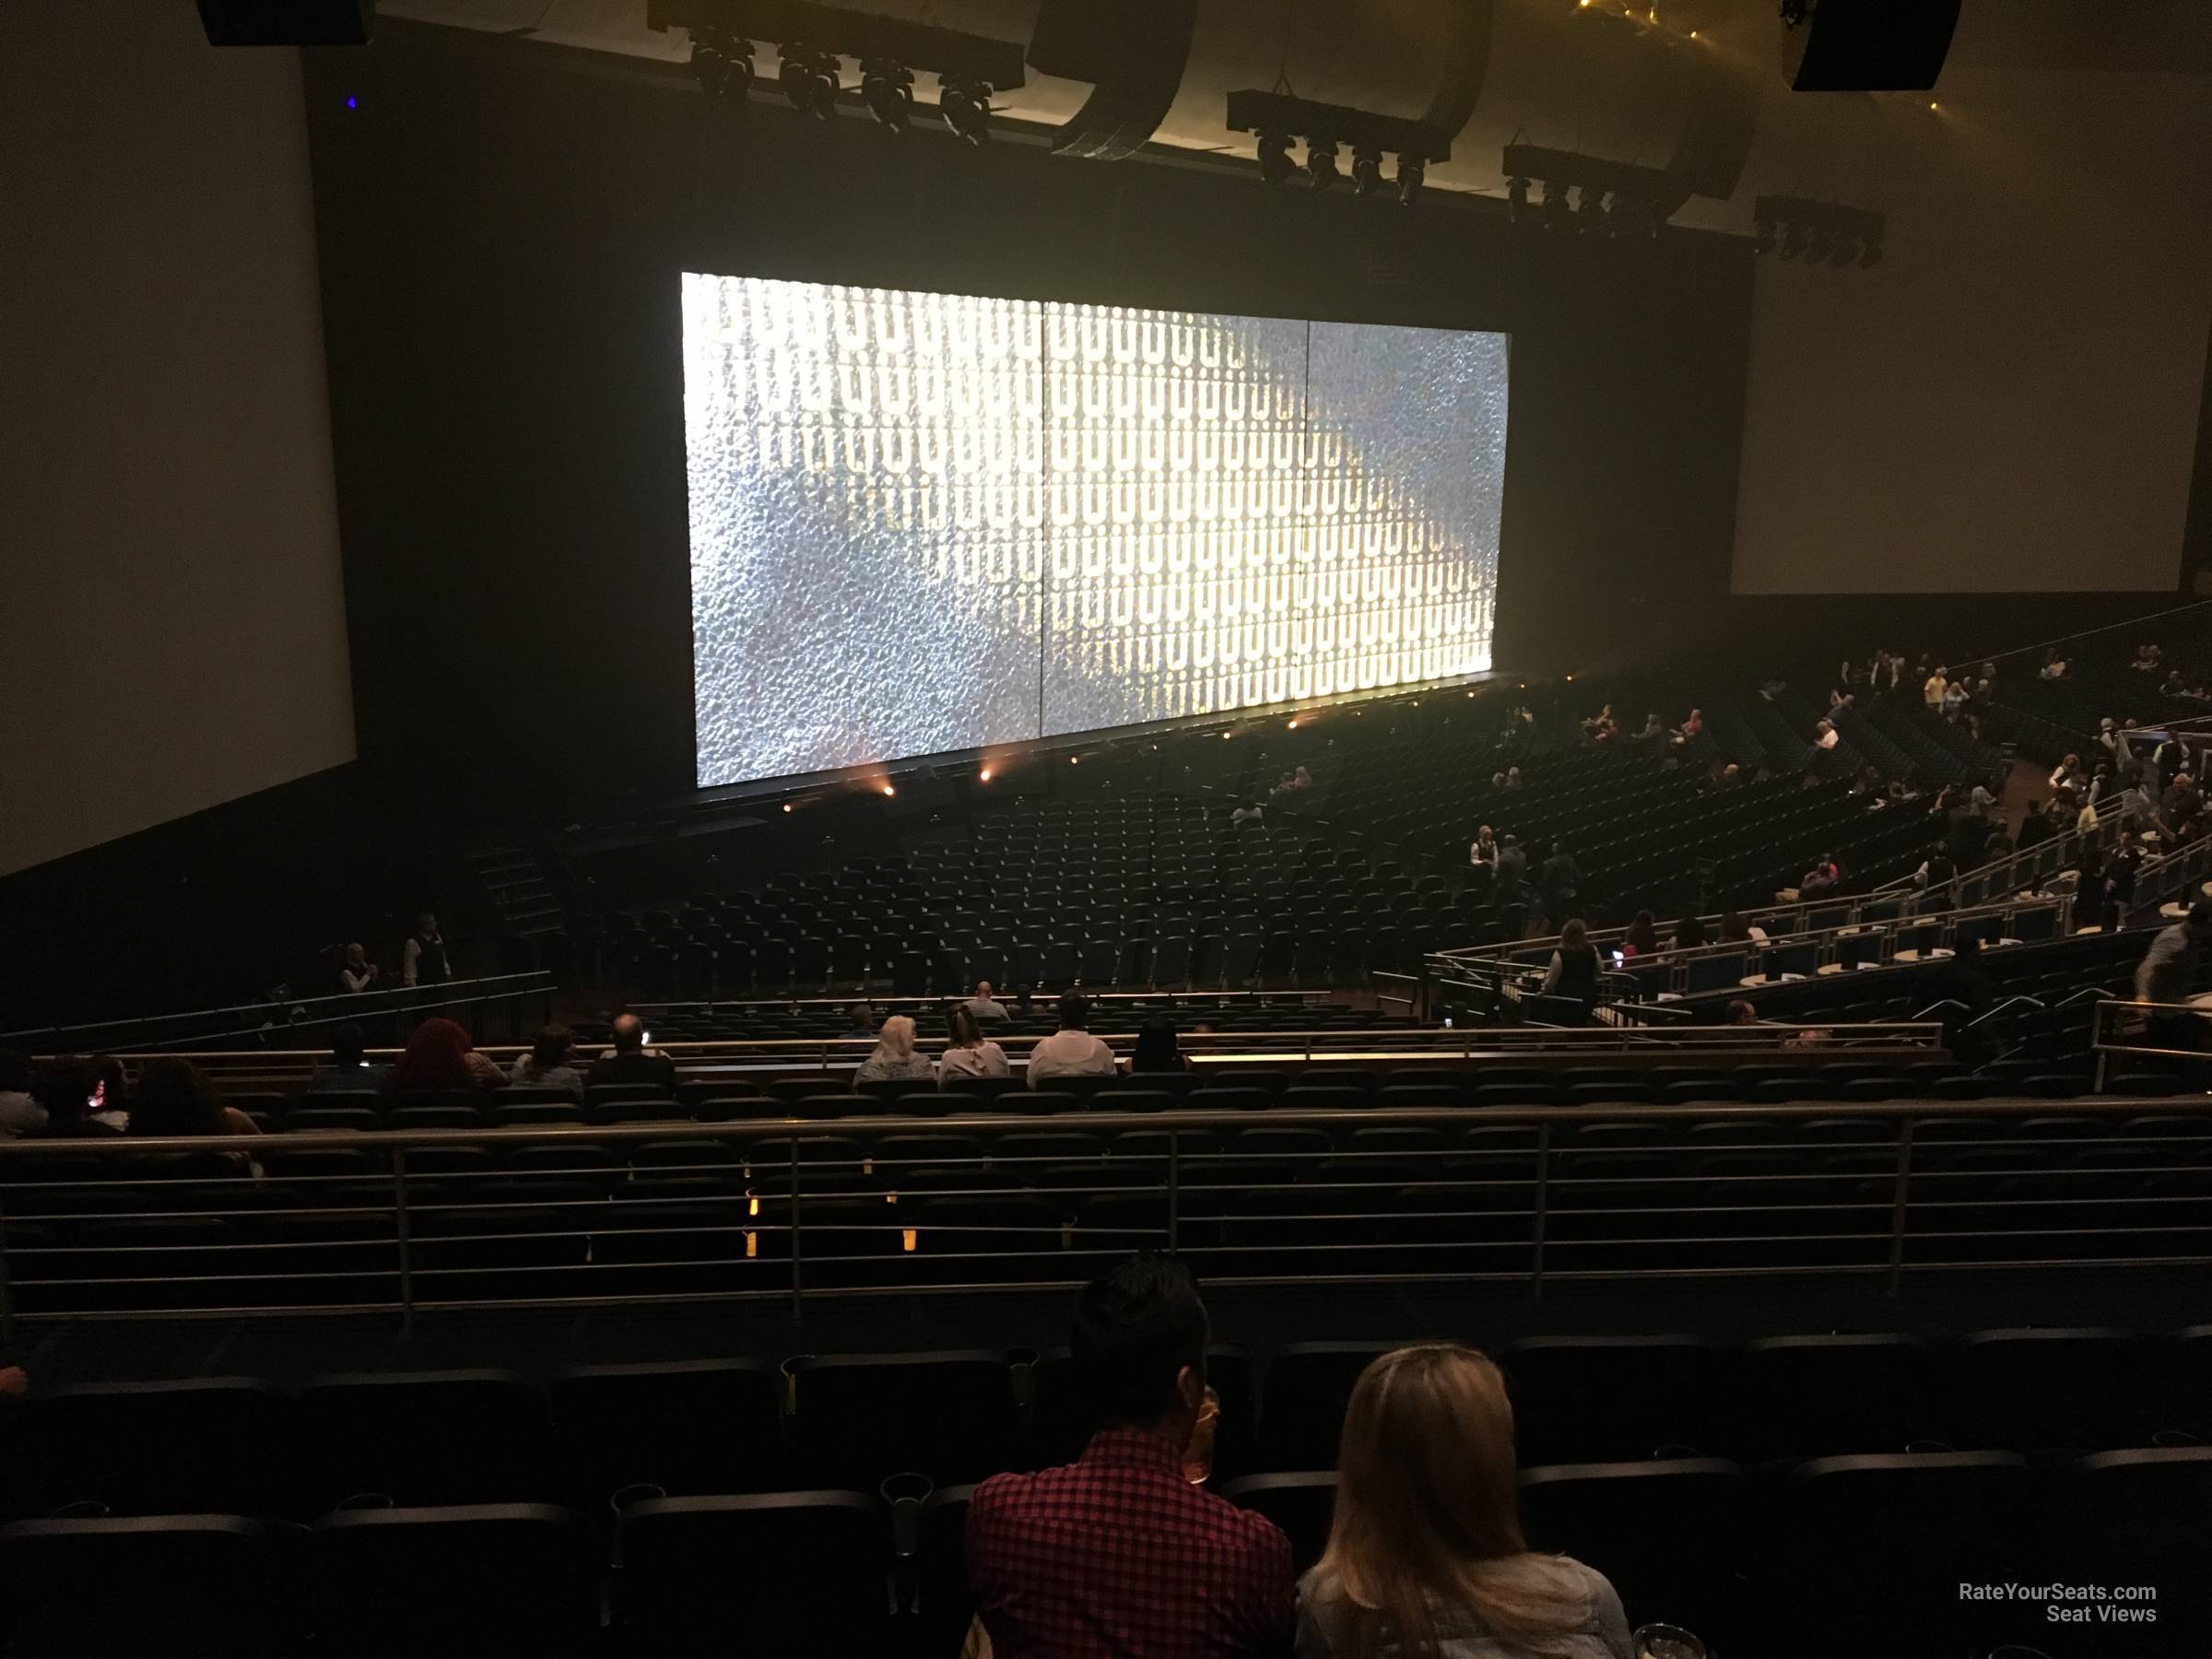 section 306, row m seat view  - dolby live at park mgm